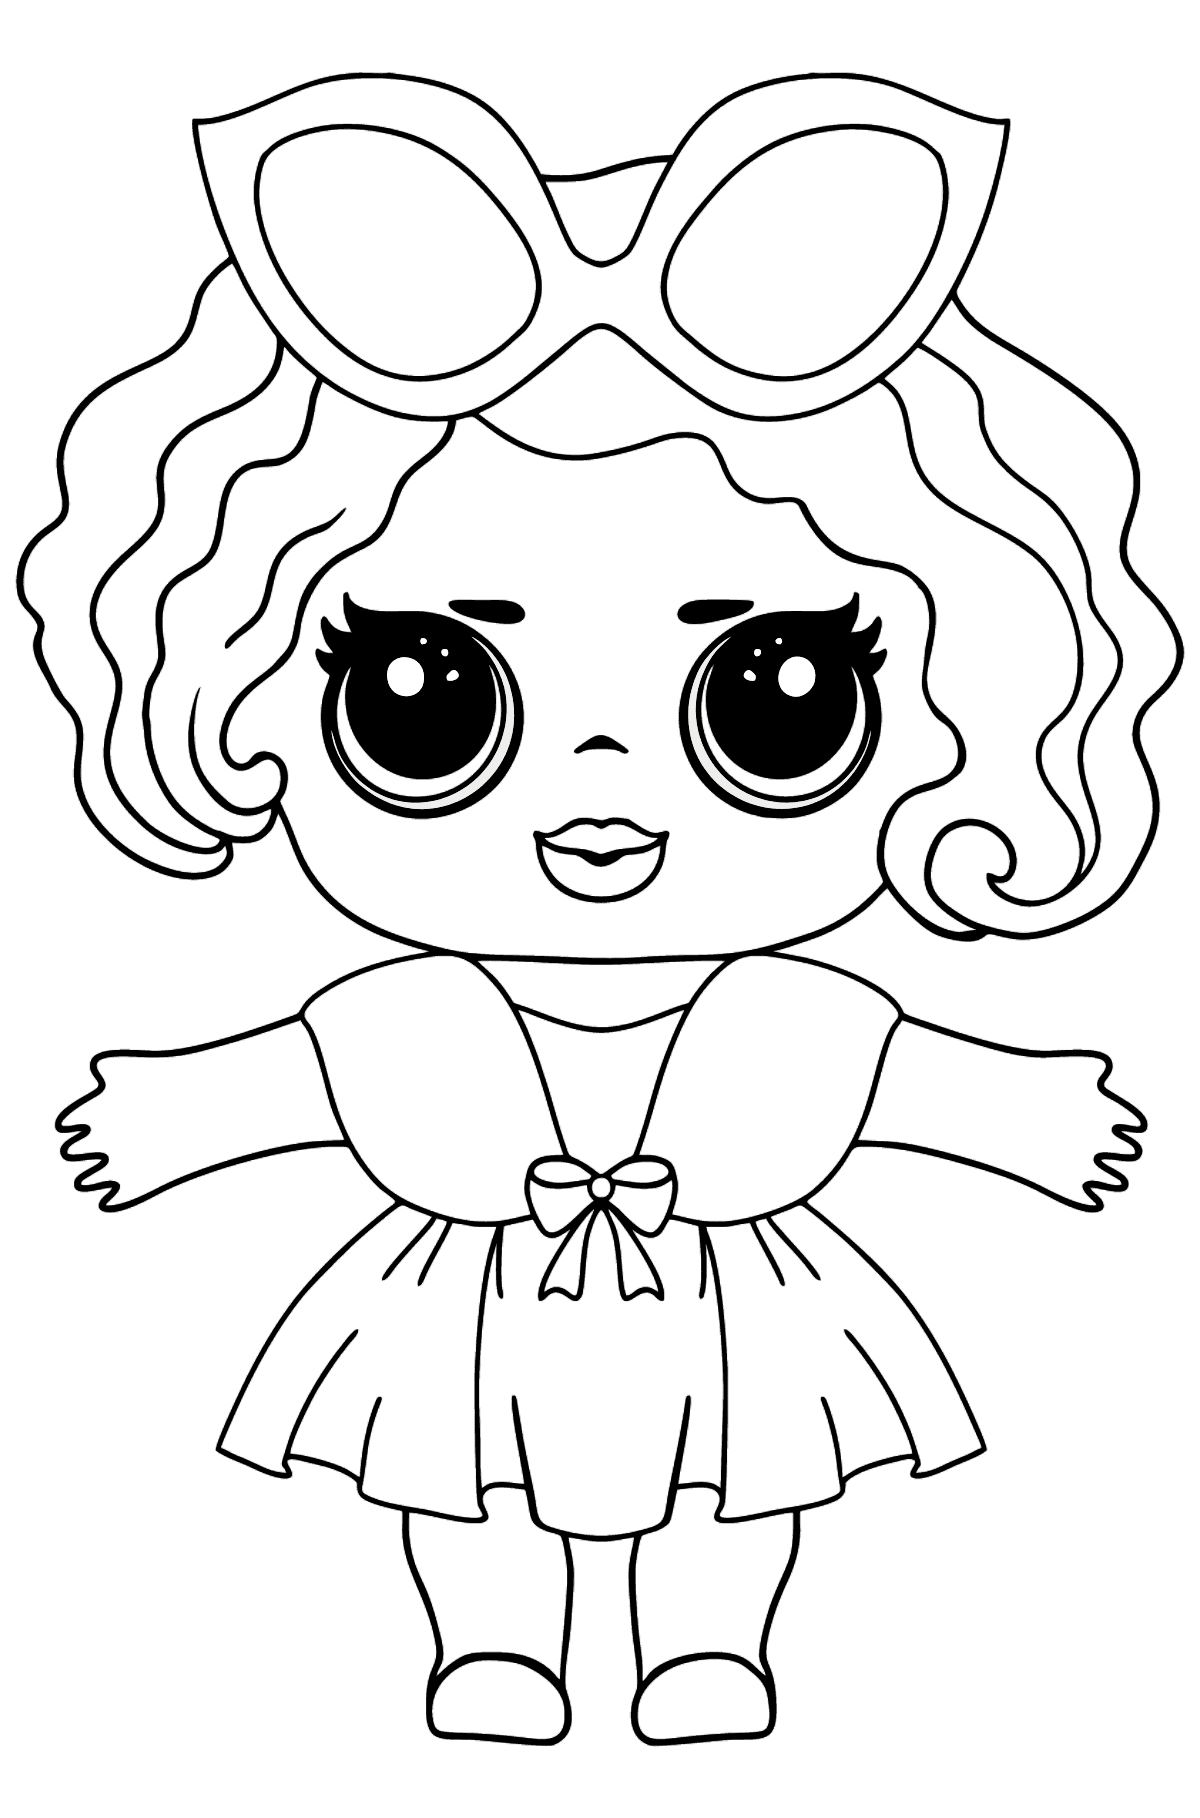 LOL Surprise Leading Baby Coloring page - Coloring Pages for Kids